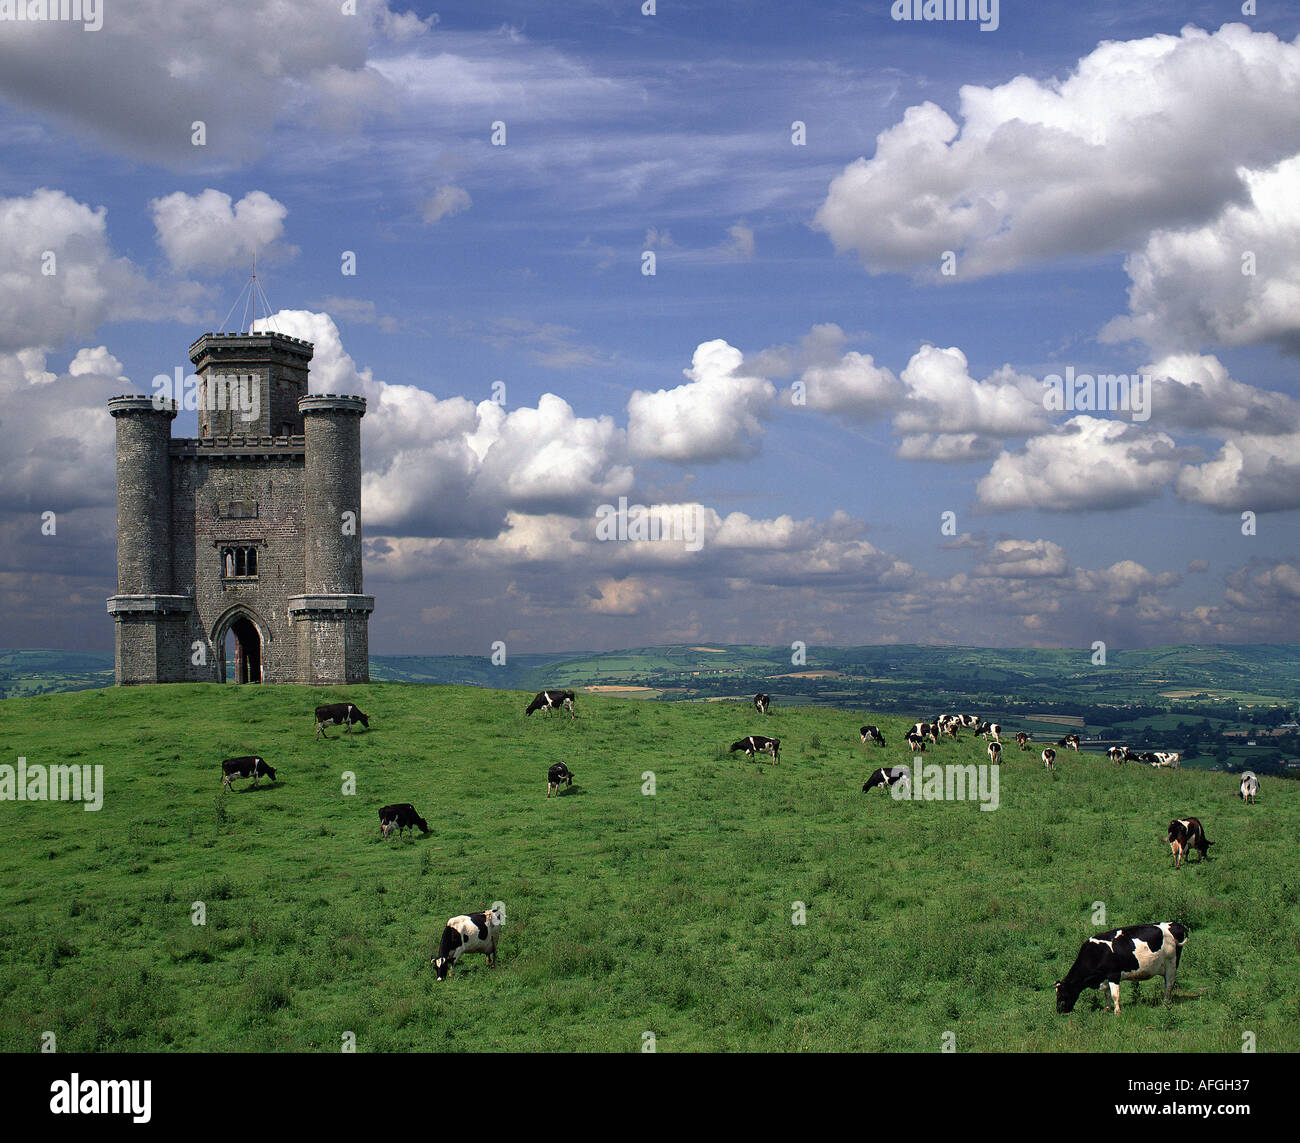 GB - WALES: Paxtons Tower, Carmarthenshire Stockfoto